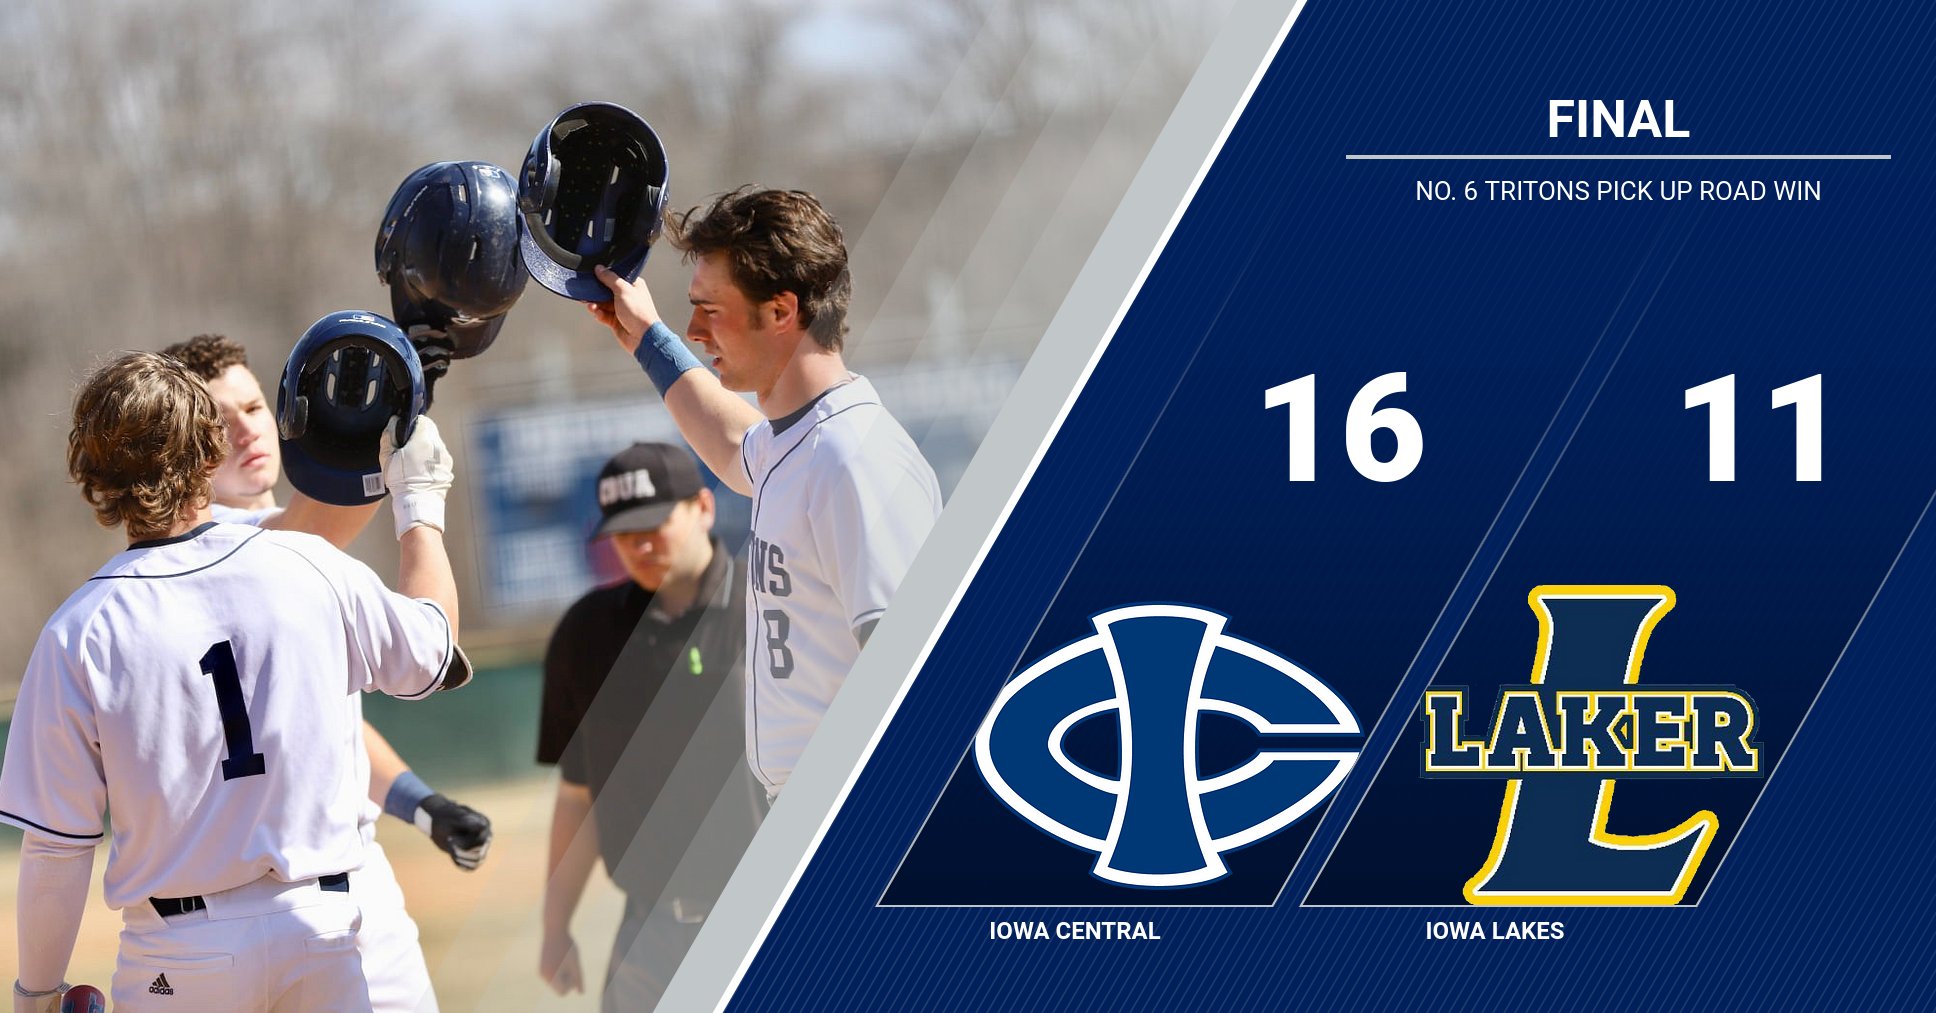 Tritons claim offensive thriller, 16-11